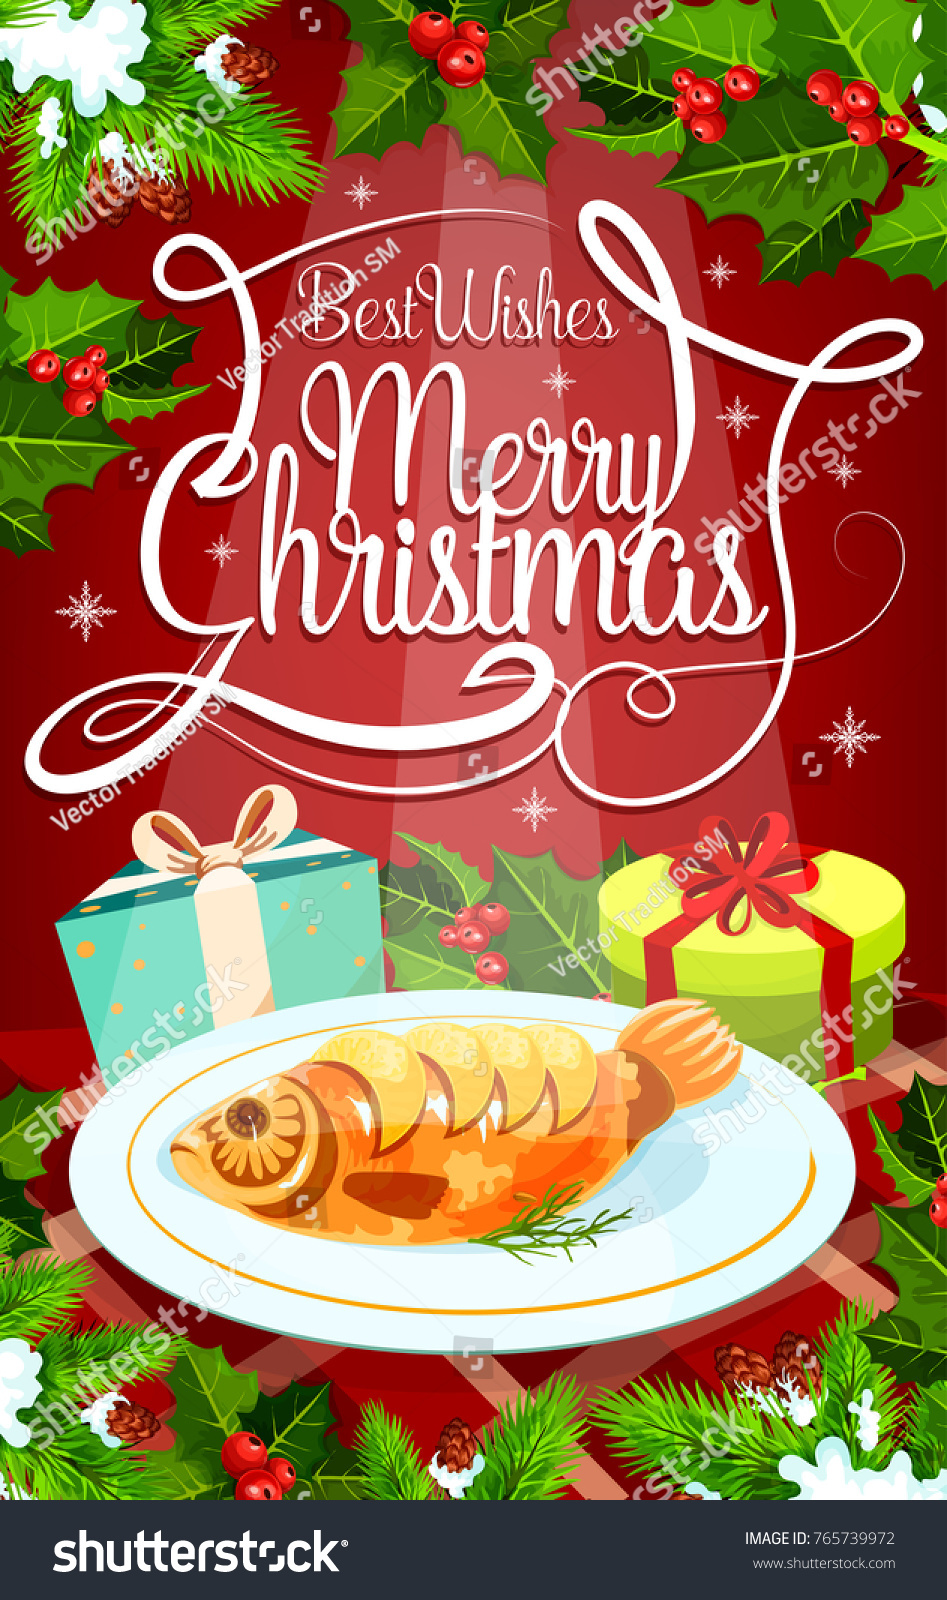 Christmas Eve Dinner Greeting Card With Gift And Baked Fish Stuffed Carp Present Box